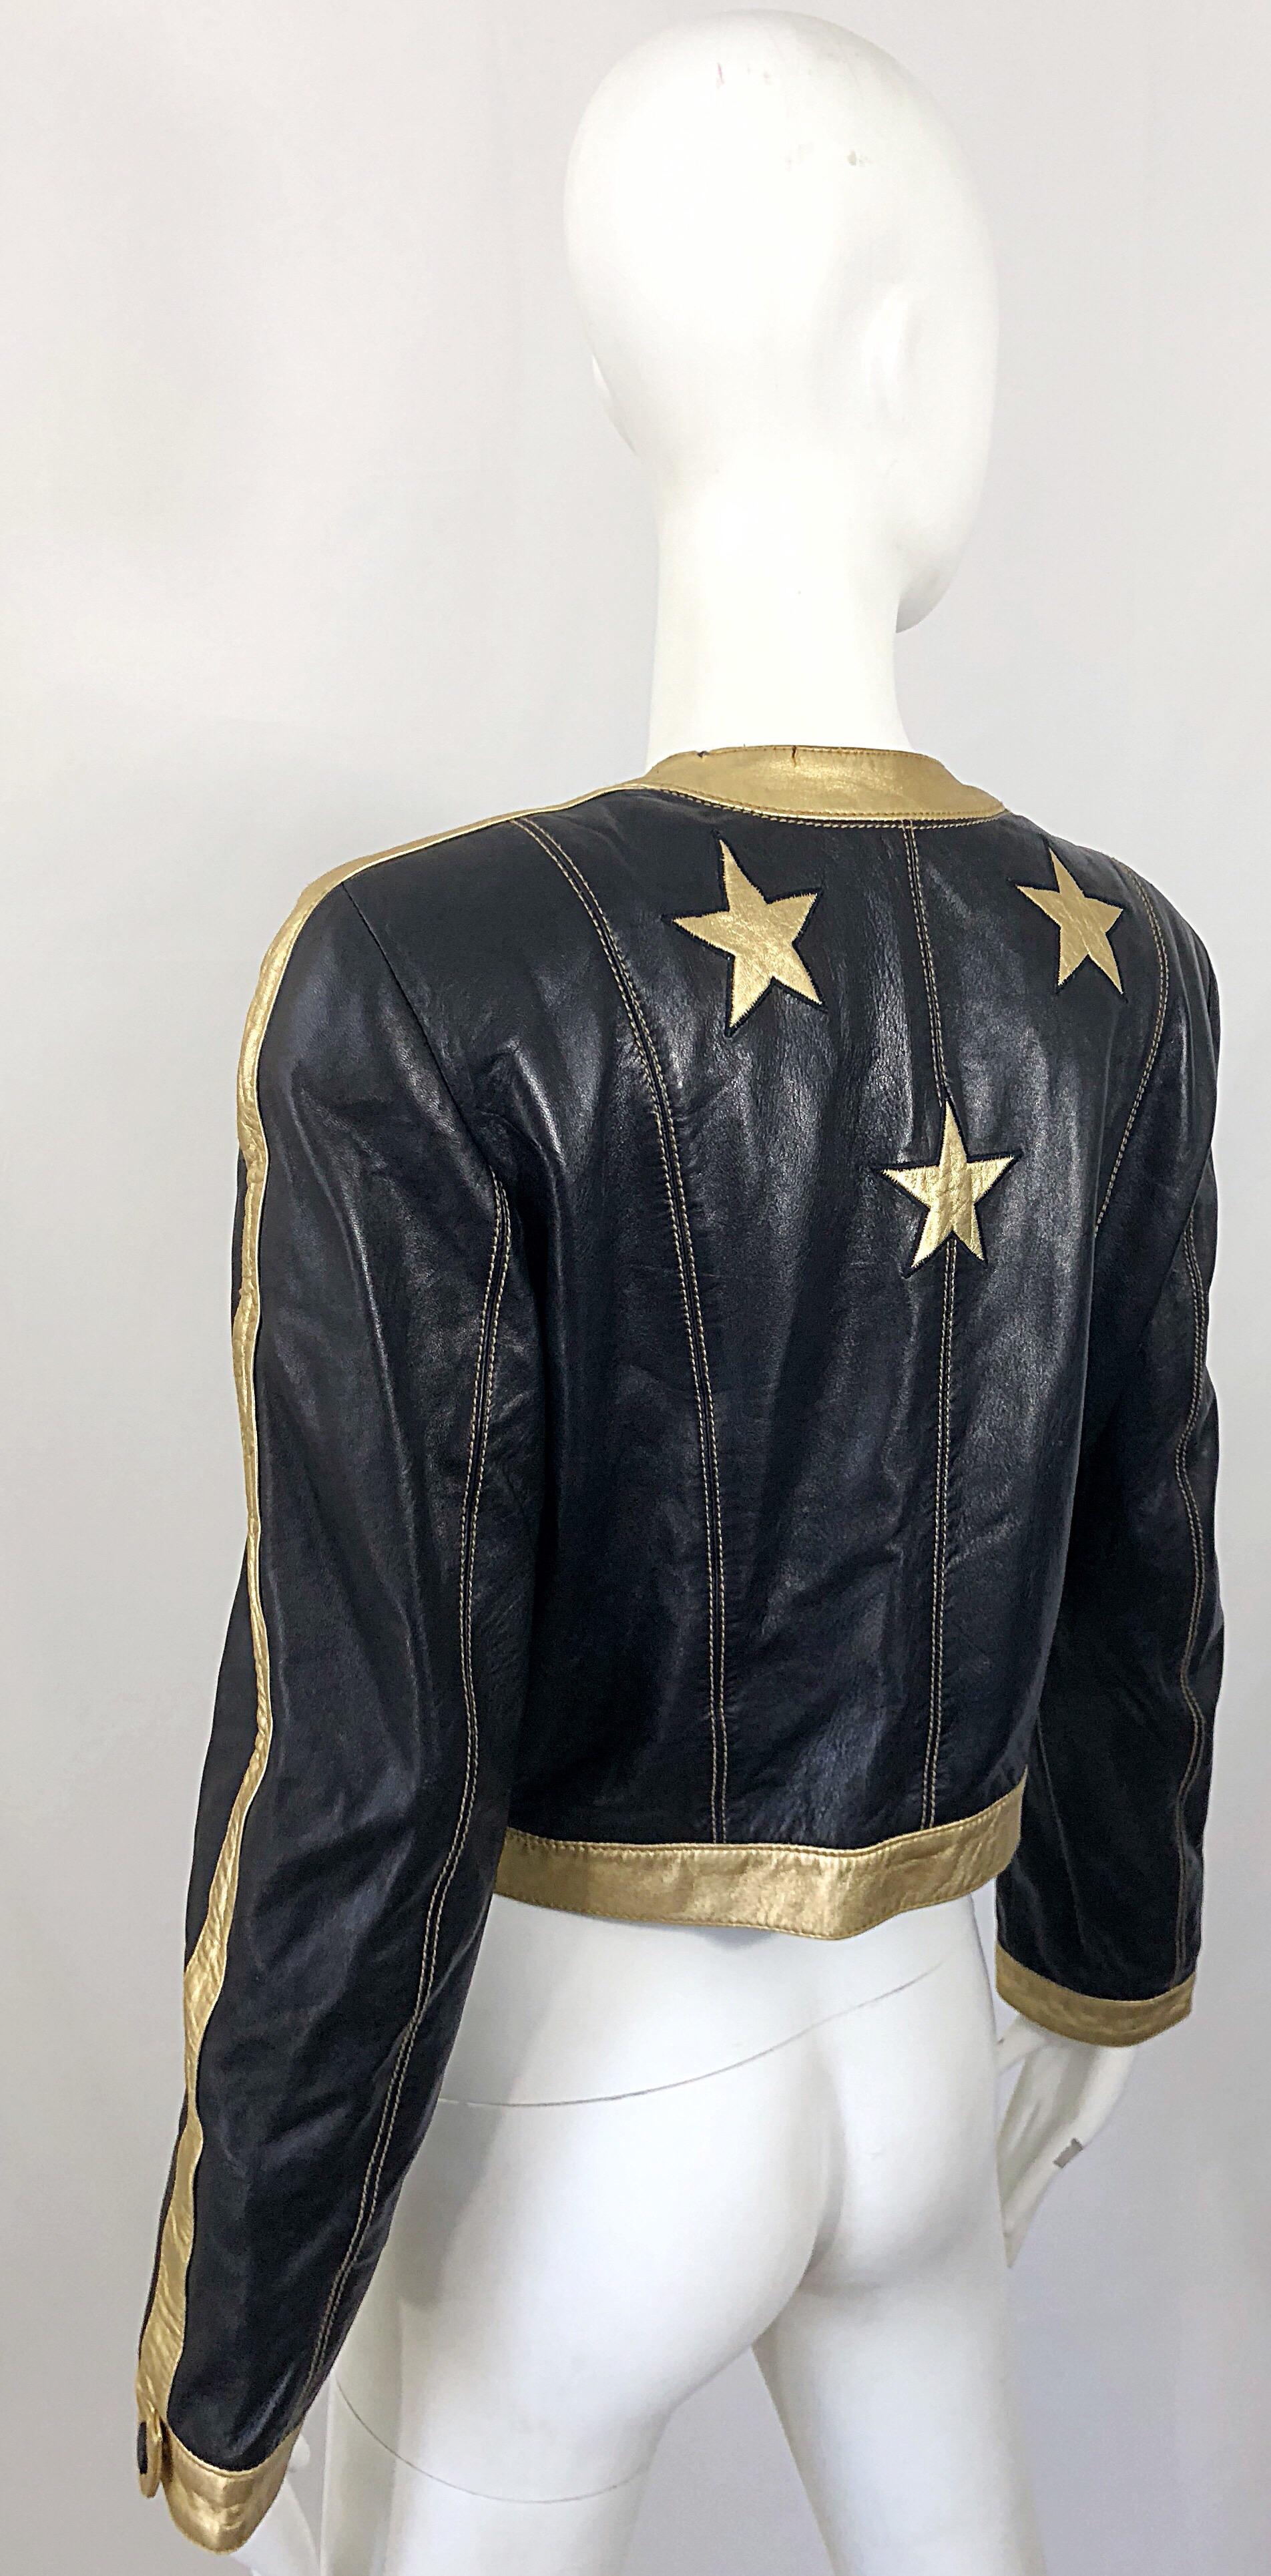 Documented Escada 1990s Black + Gold Leather Stars Vintage 90s Cropped Jacket 7